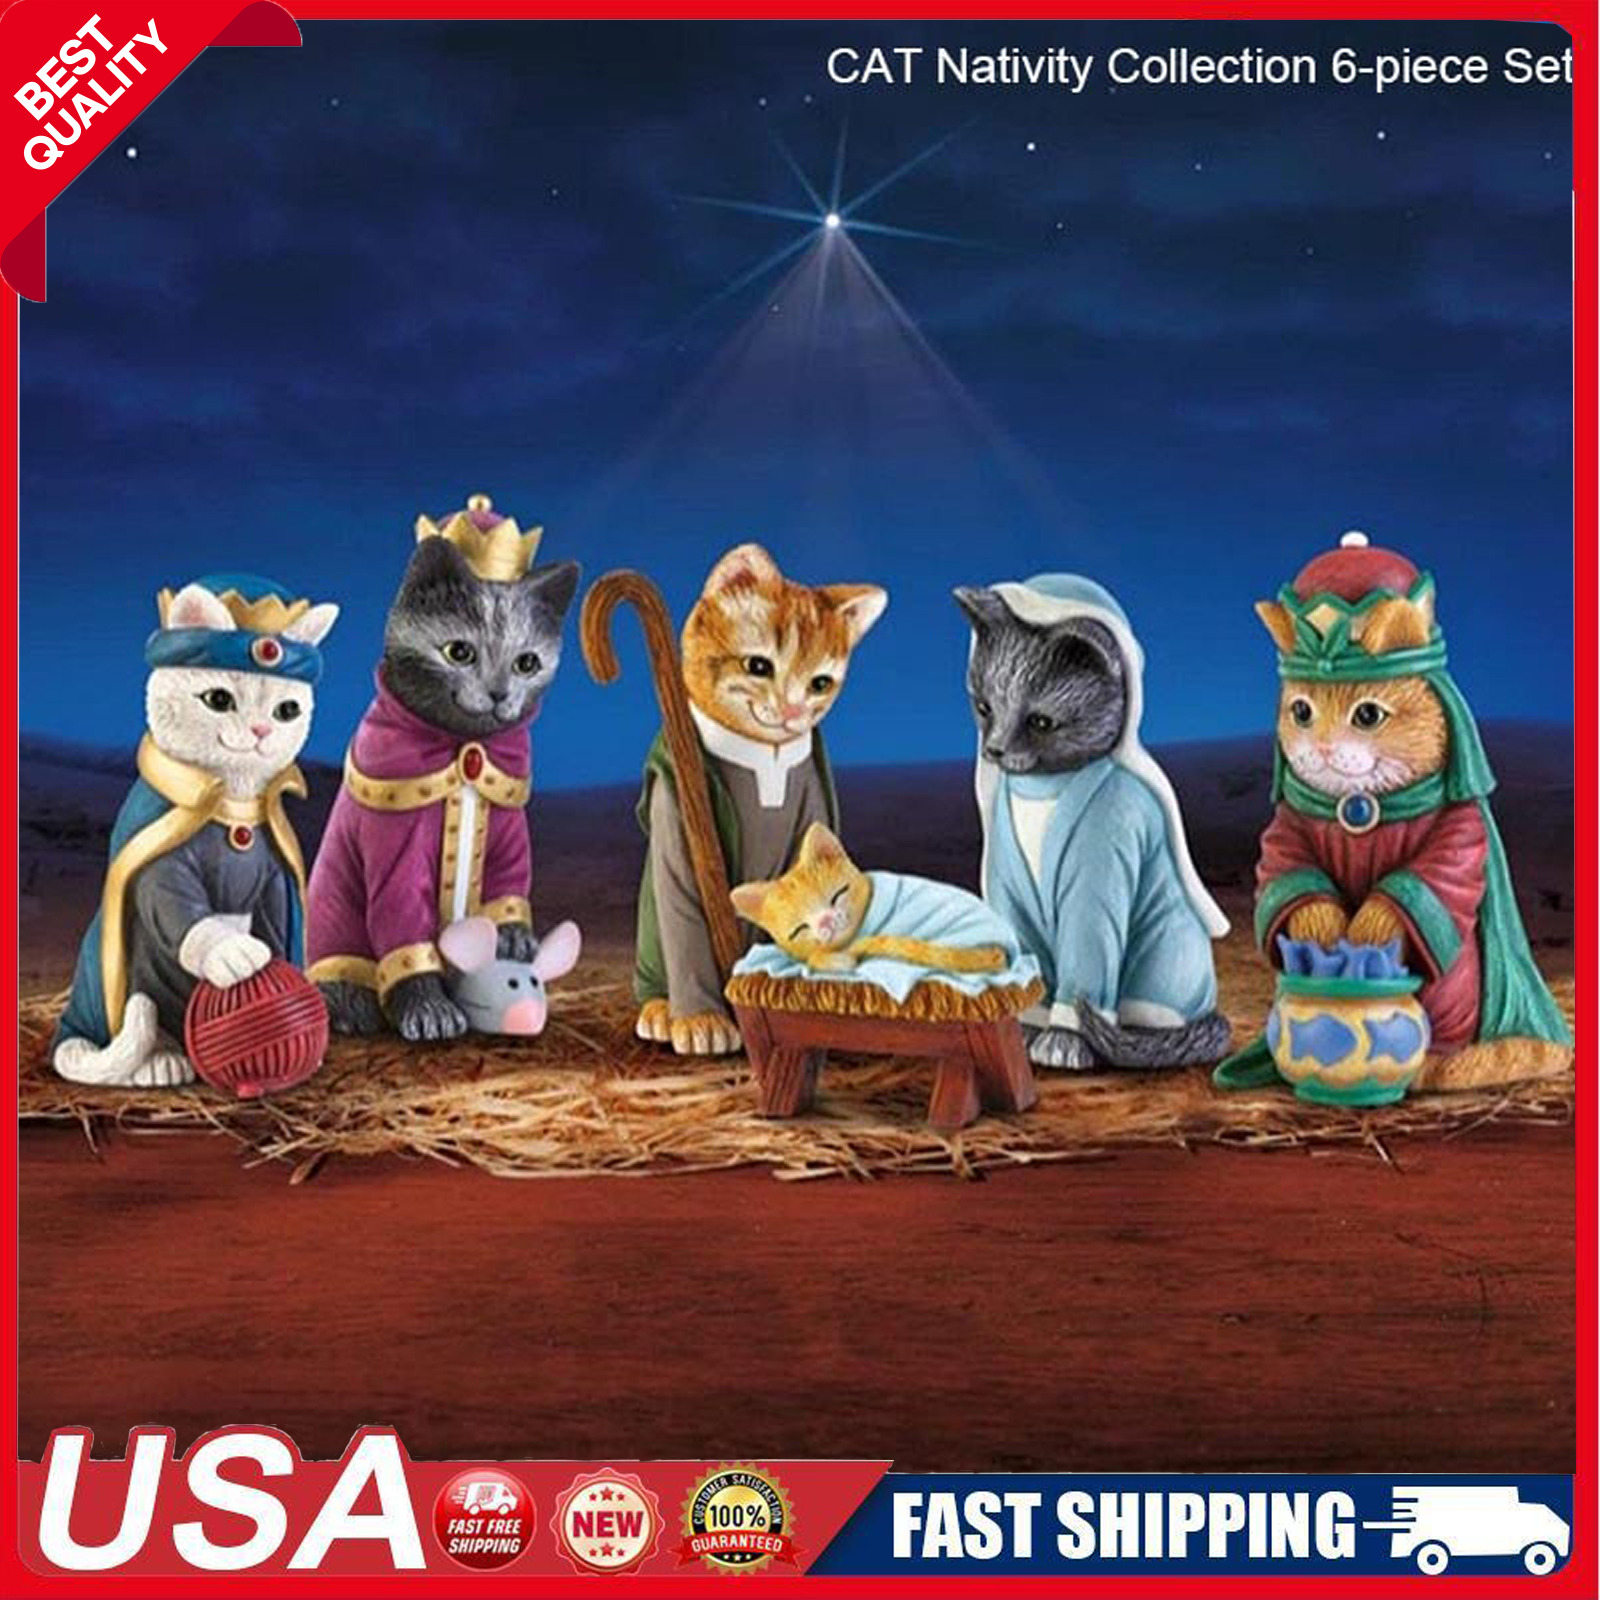 6X Christmas Nativity Set Resin Cat Royal Crafts Statue Home Tabletop Ornaments